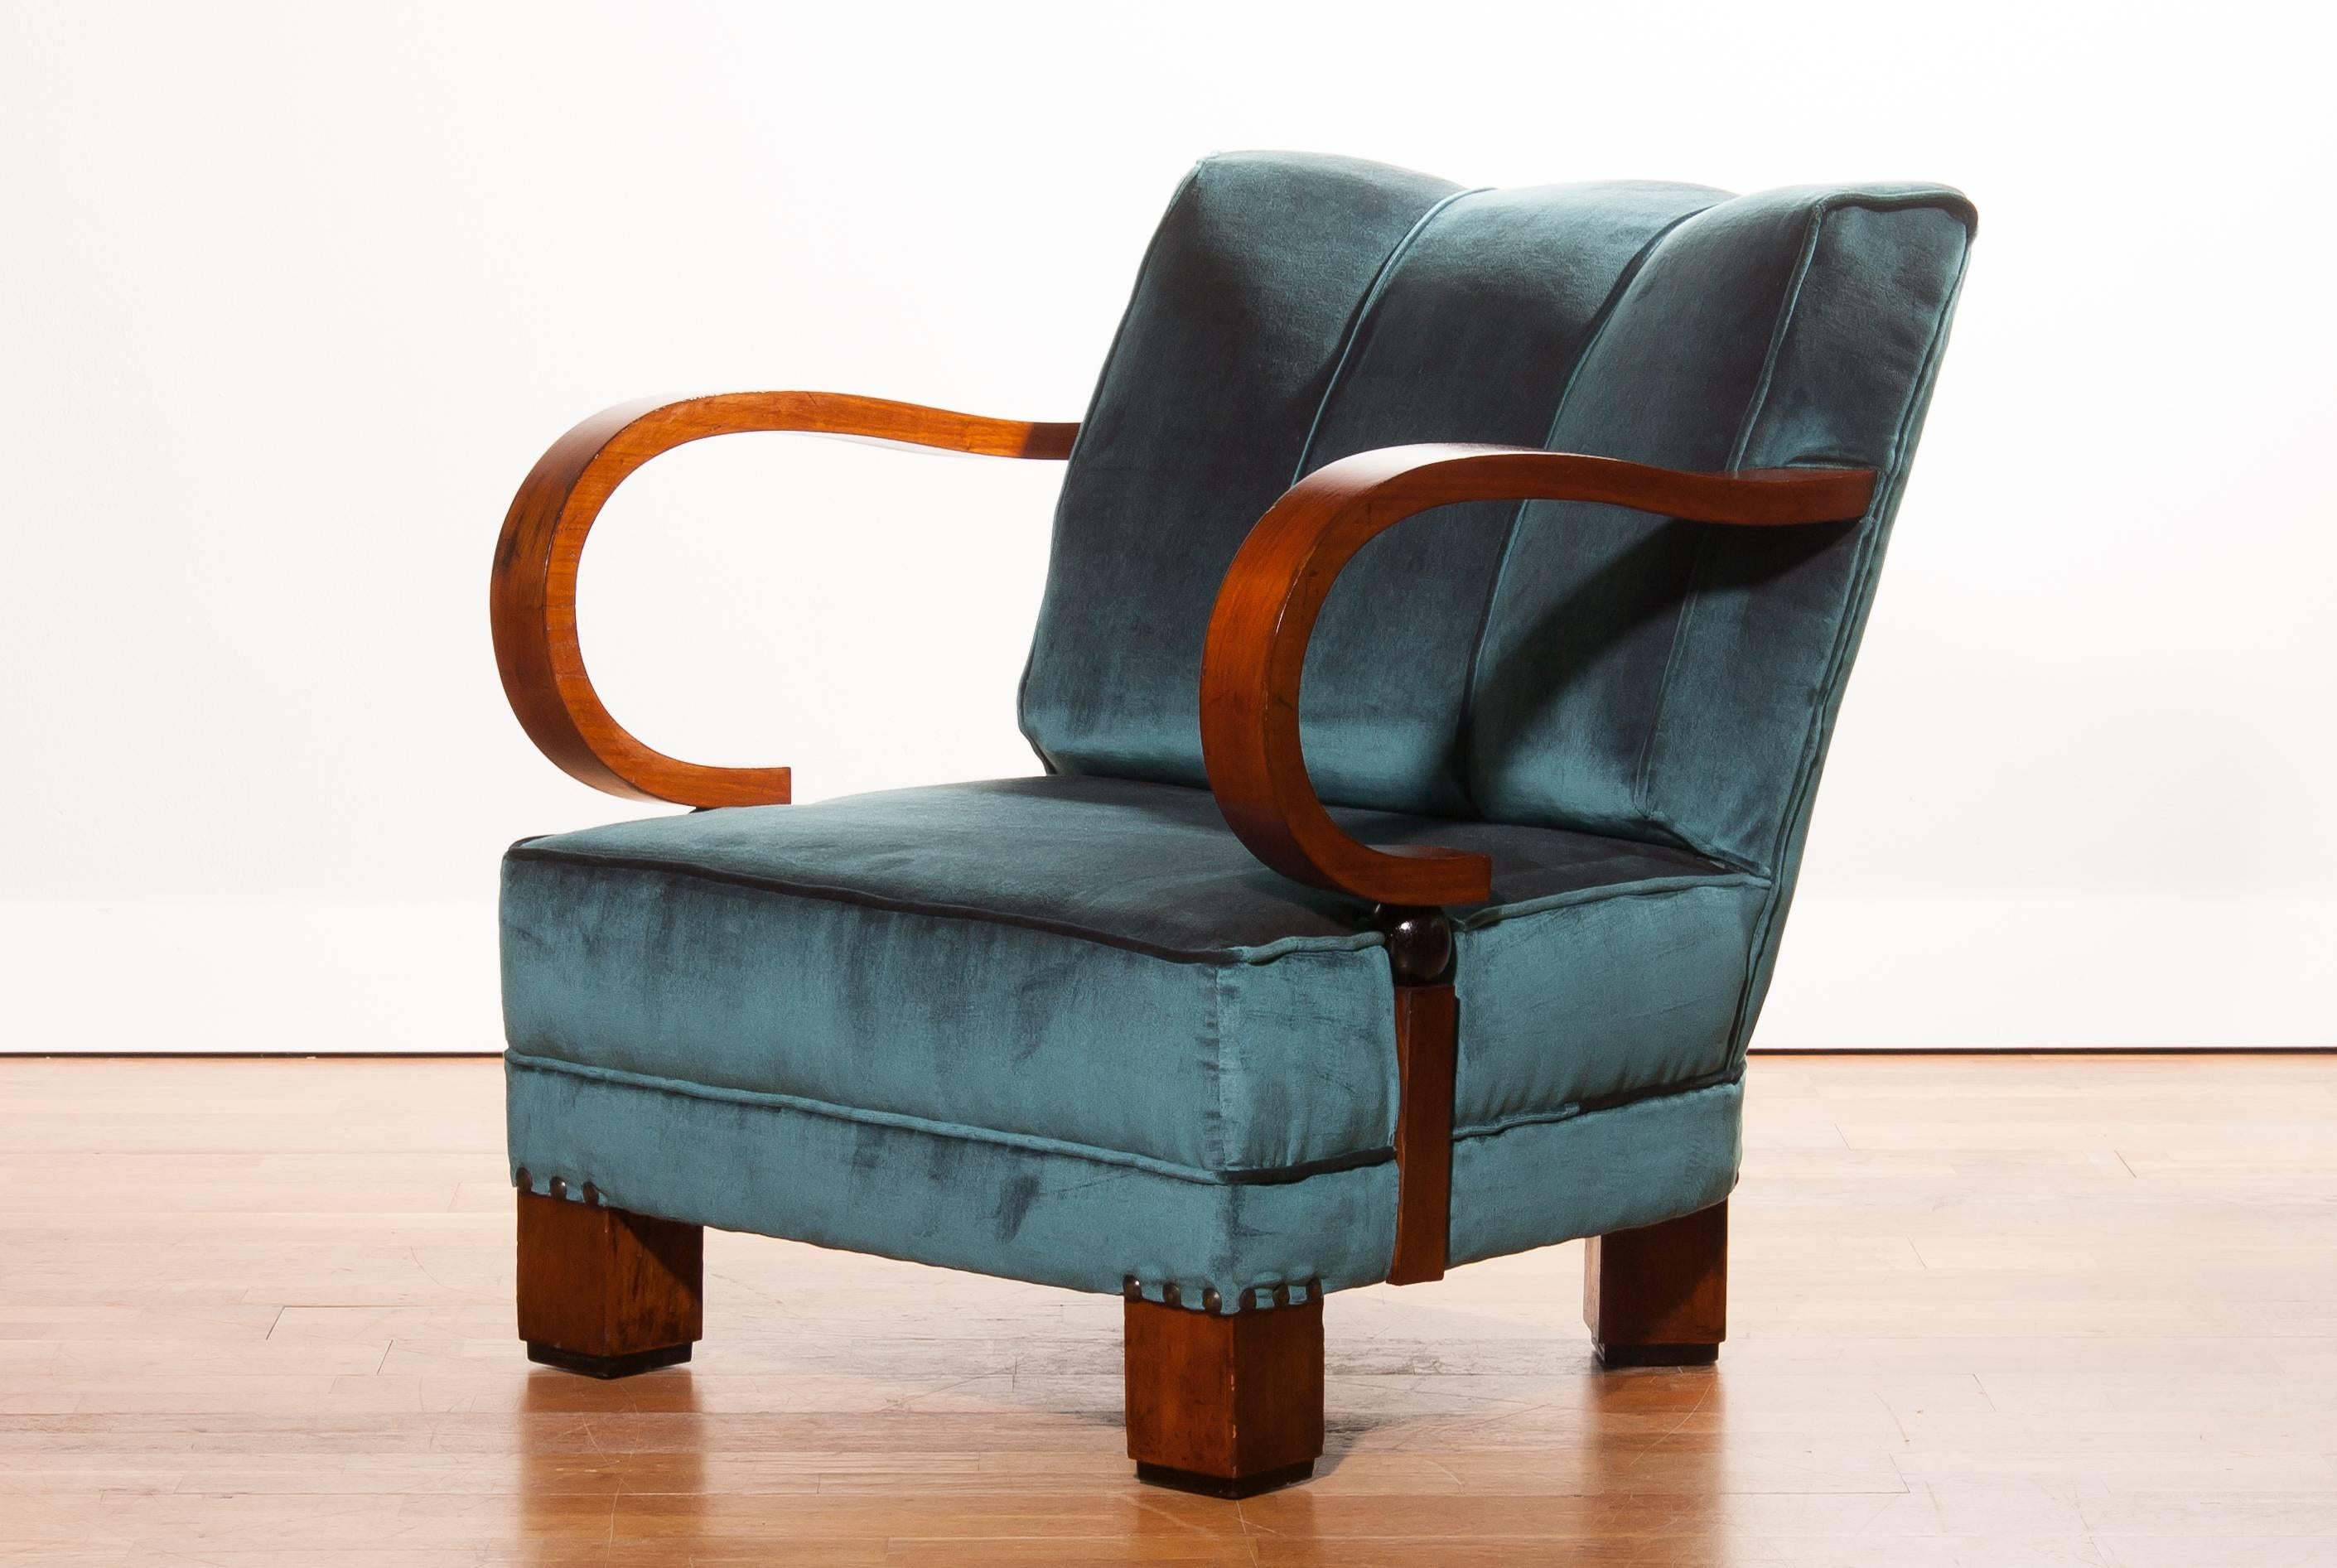 A magnificent blue velvet club chair.
This beautiful chair is made of mahogany wooden armrests and legs with (new) blue velvet upholstery.
It has a very comfortable seating.
The condition of this chair is very good.
Period 1920s
Dimensions: H. 80